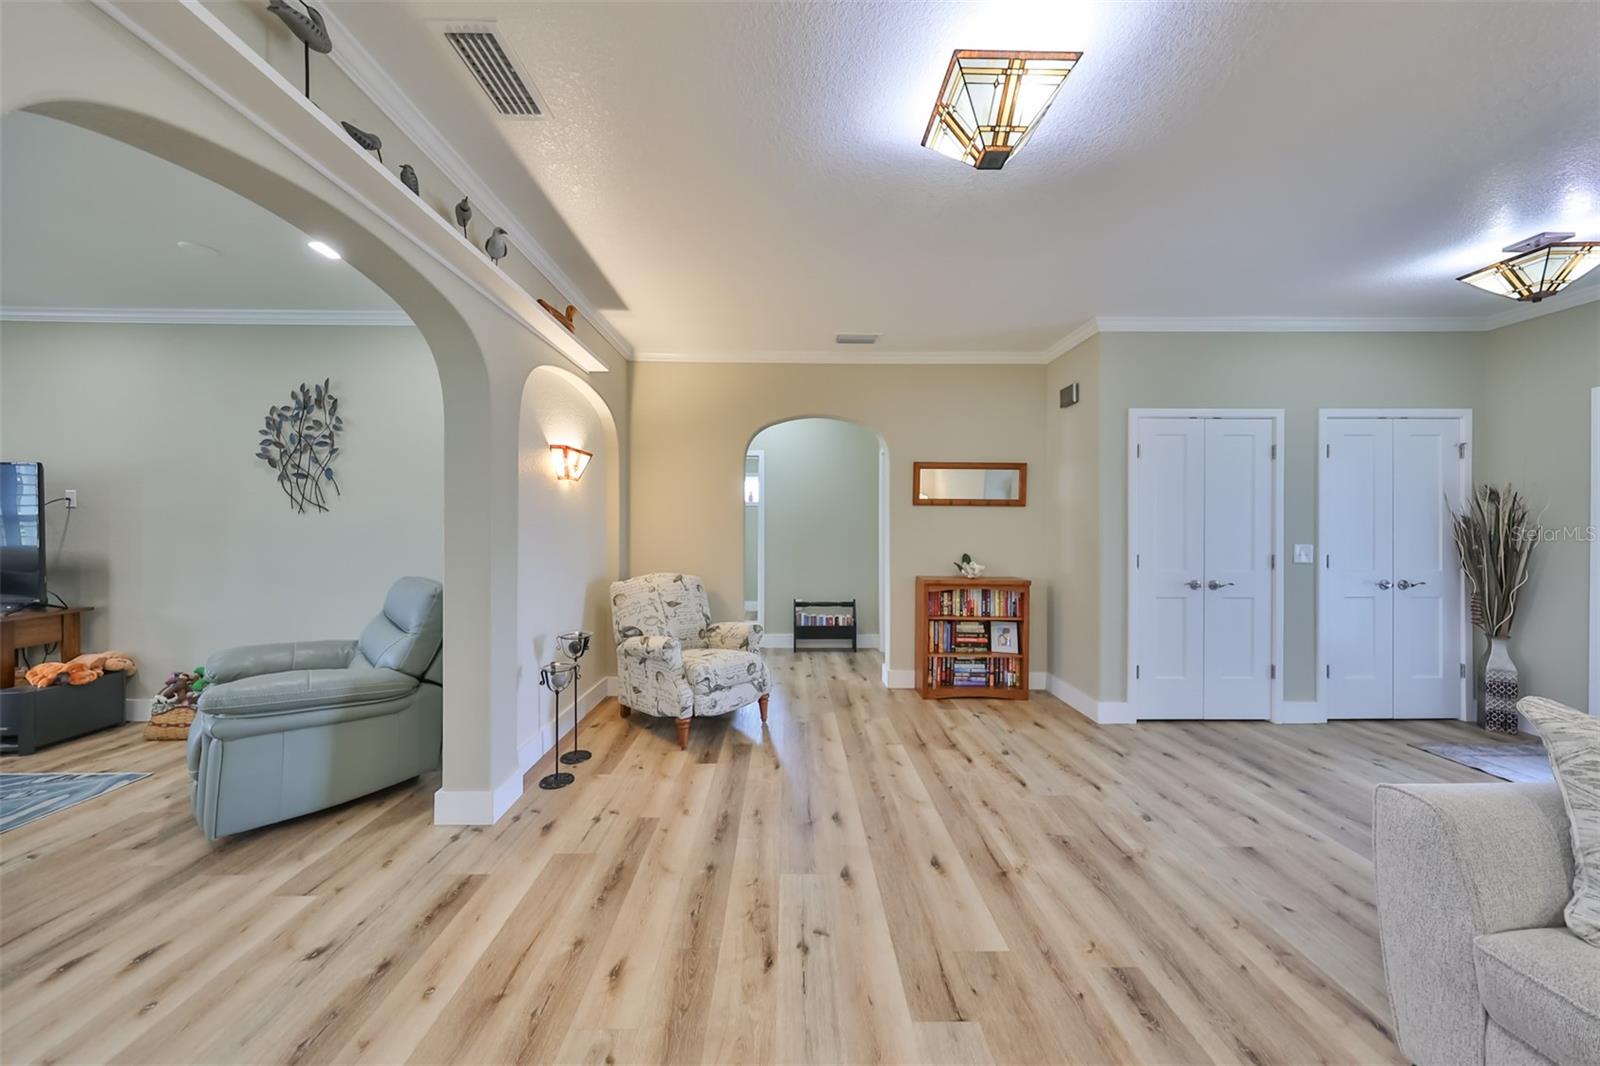 Arched doorways, crown molding, and custom lighting opens up from the entrance foyer/den into the living room. The small interior wall offers a little added privacy to separate the two rooms, while still creating an "open floor plan" feeling at the same time.